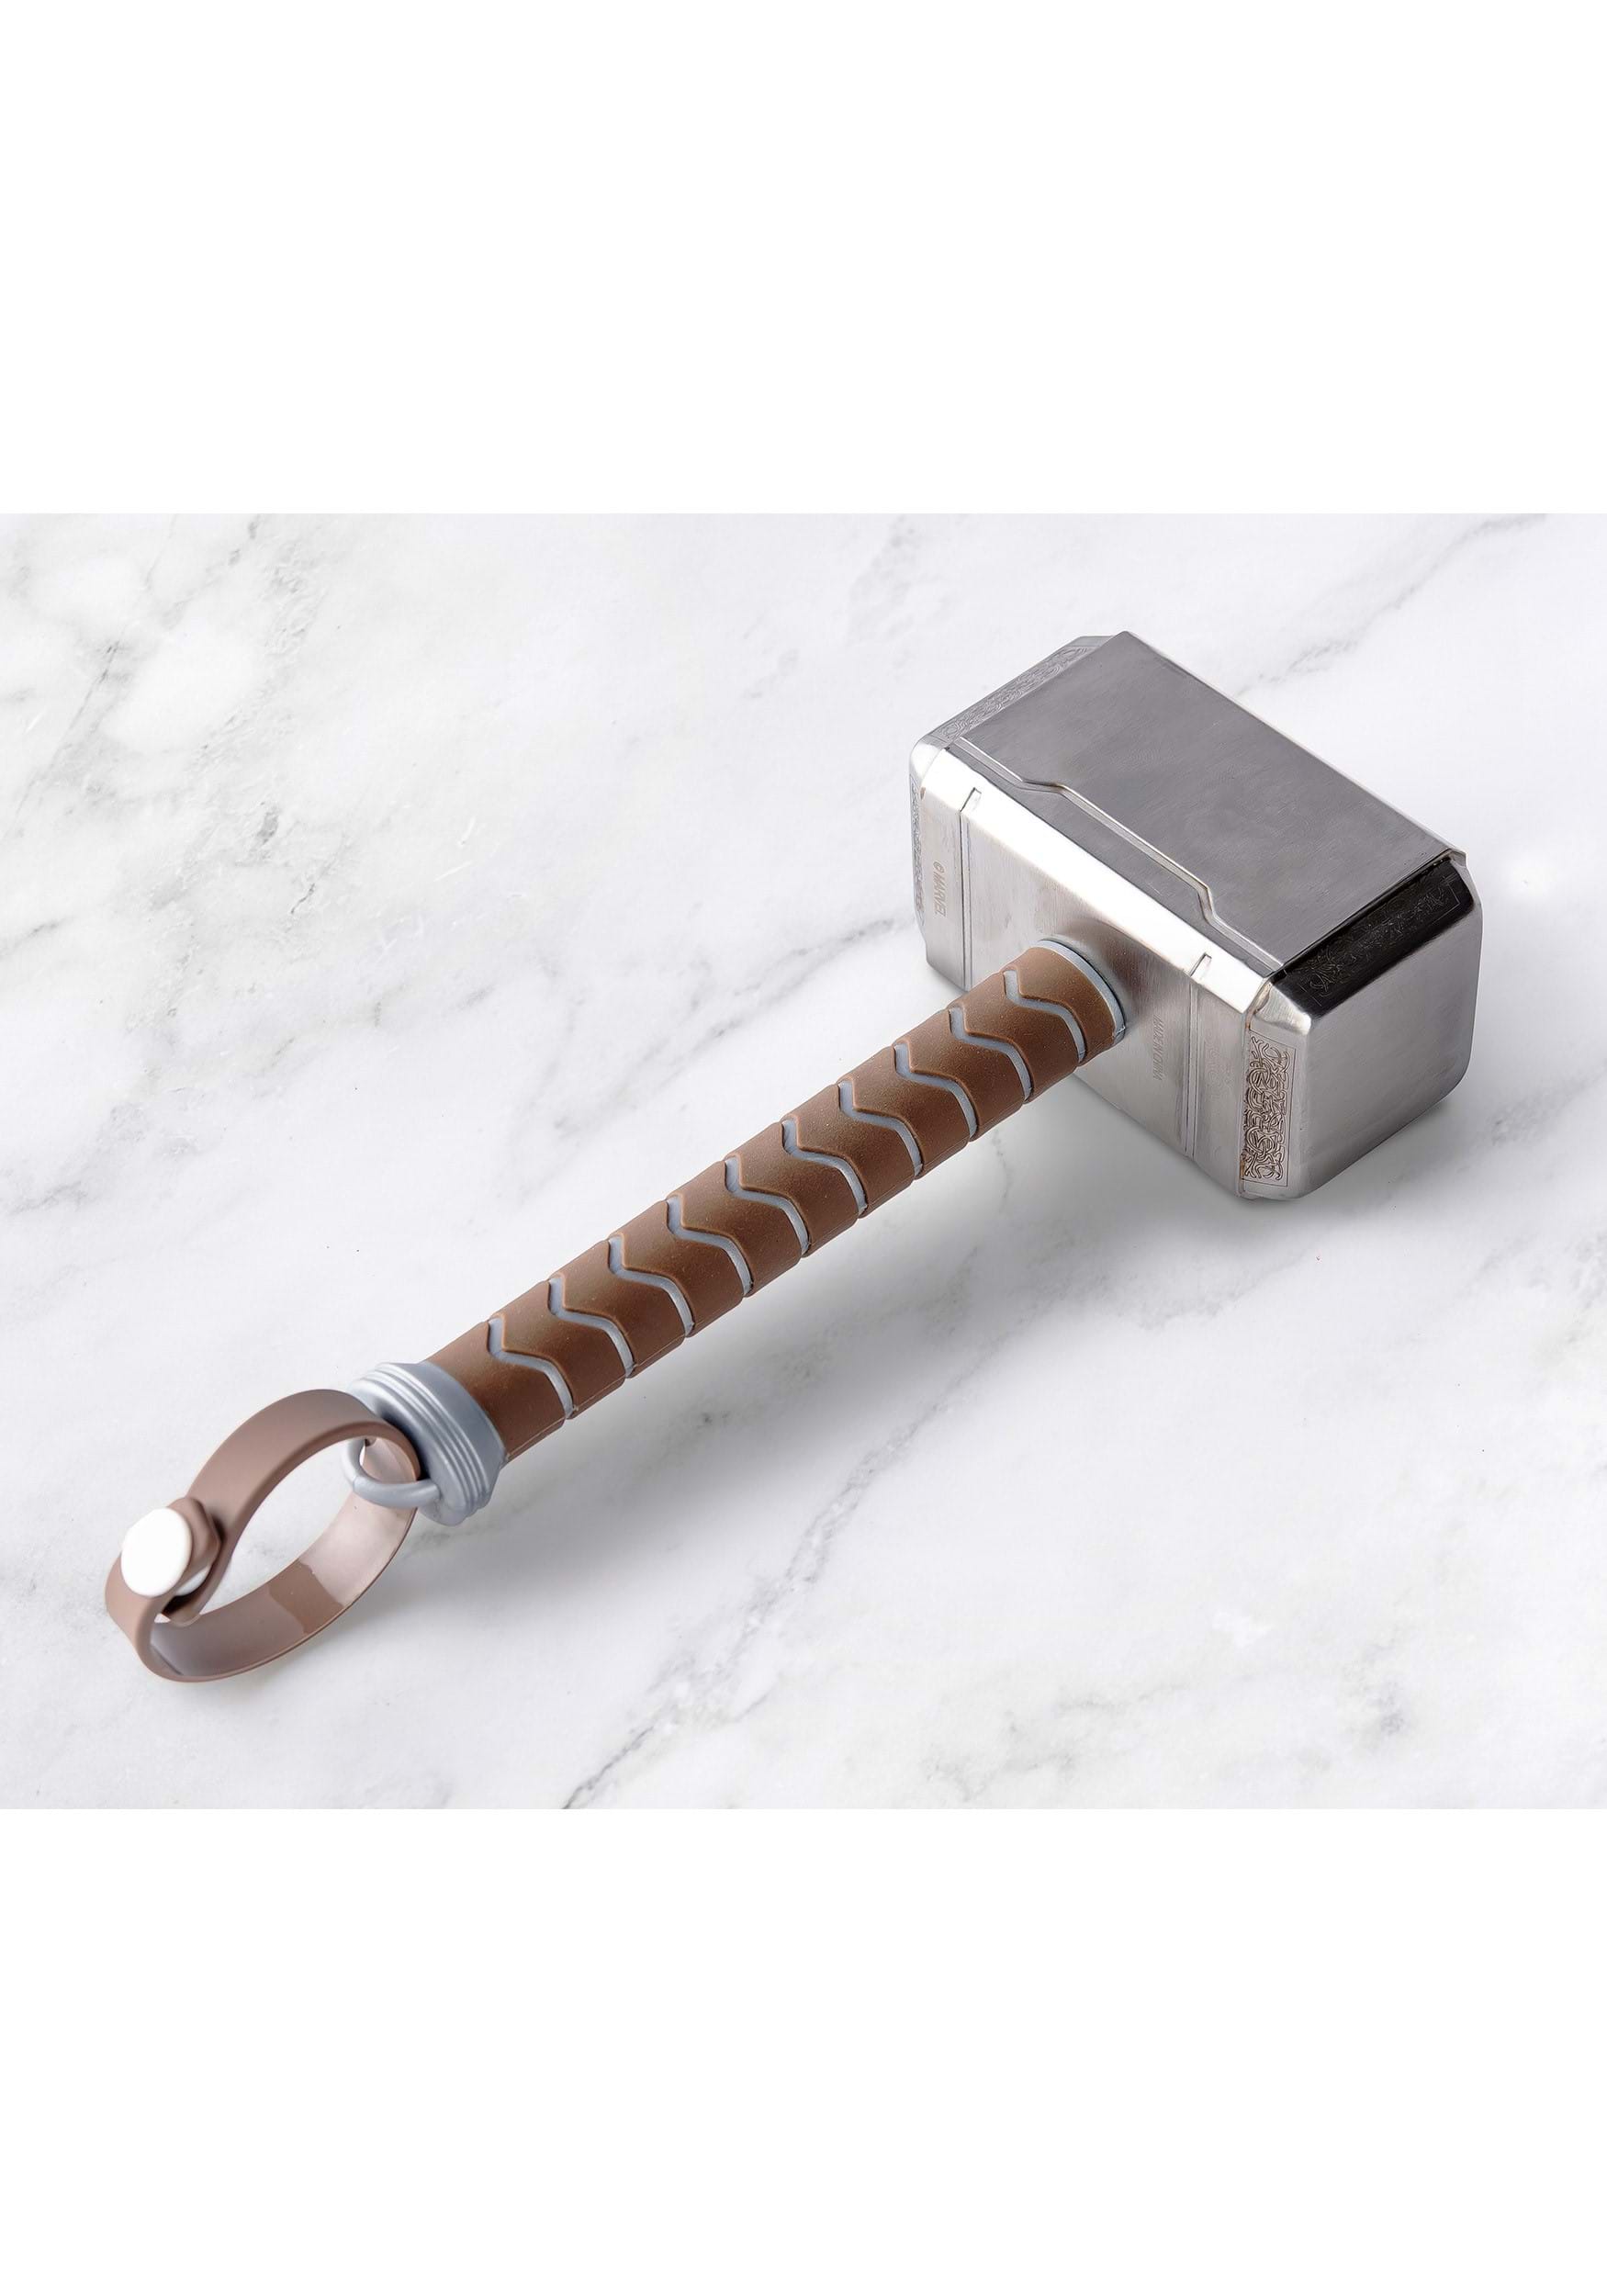 https://images.fun.com/products/89796/2-1-256562/marvel-thor-meat-tenderizer-alt-1.jpg